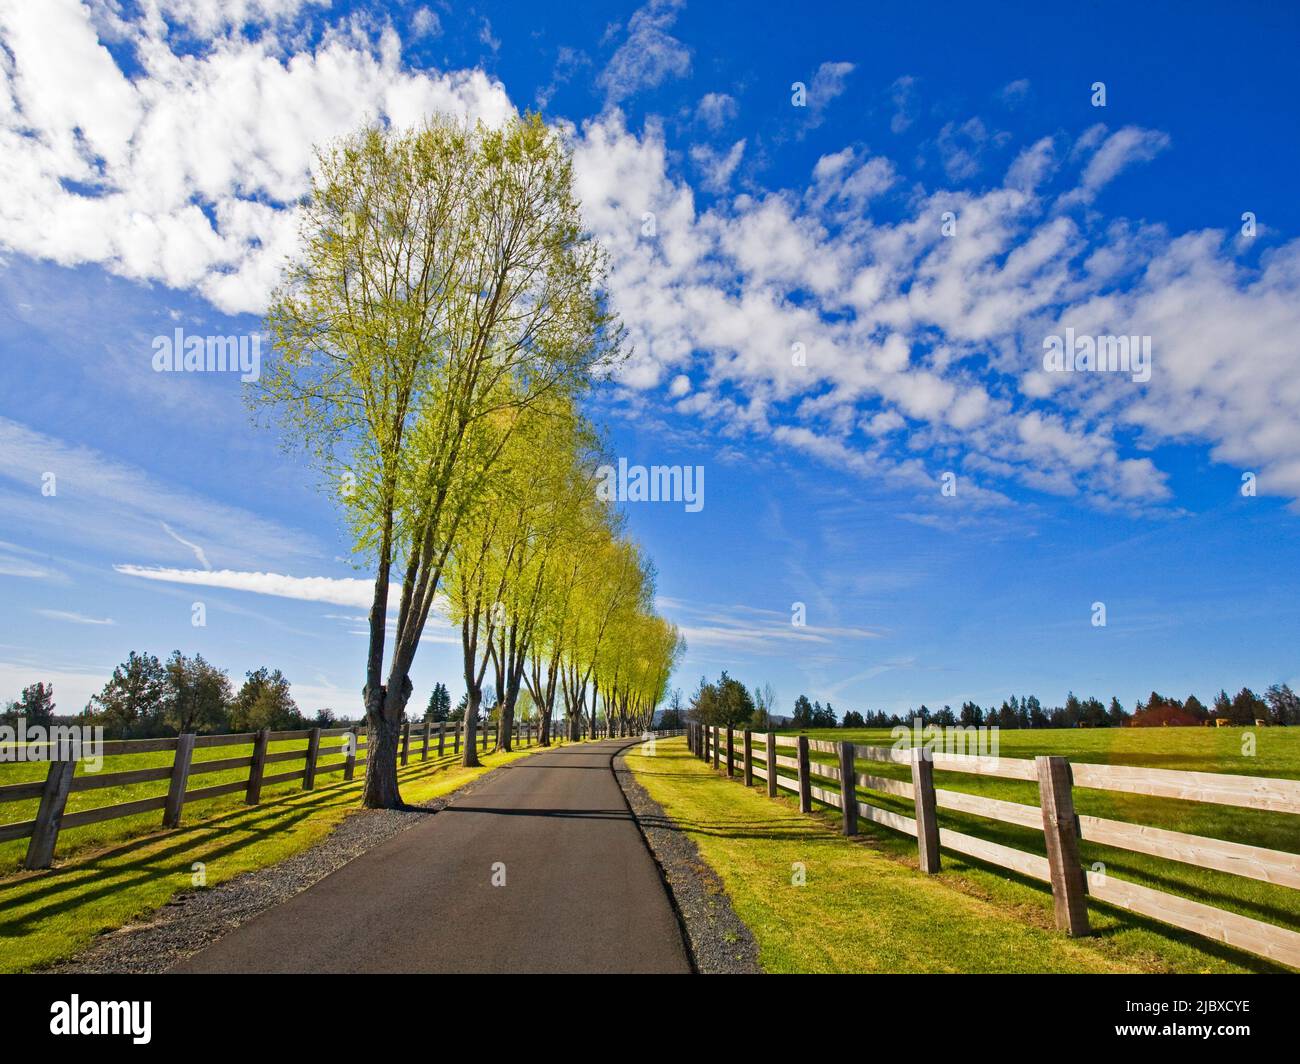 Willow trees budding out in spring along a rural ranch driveway in Tumalo, Oregon. Stock Photo